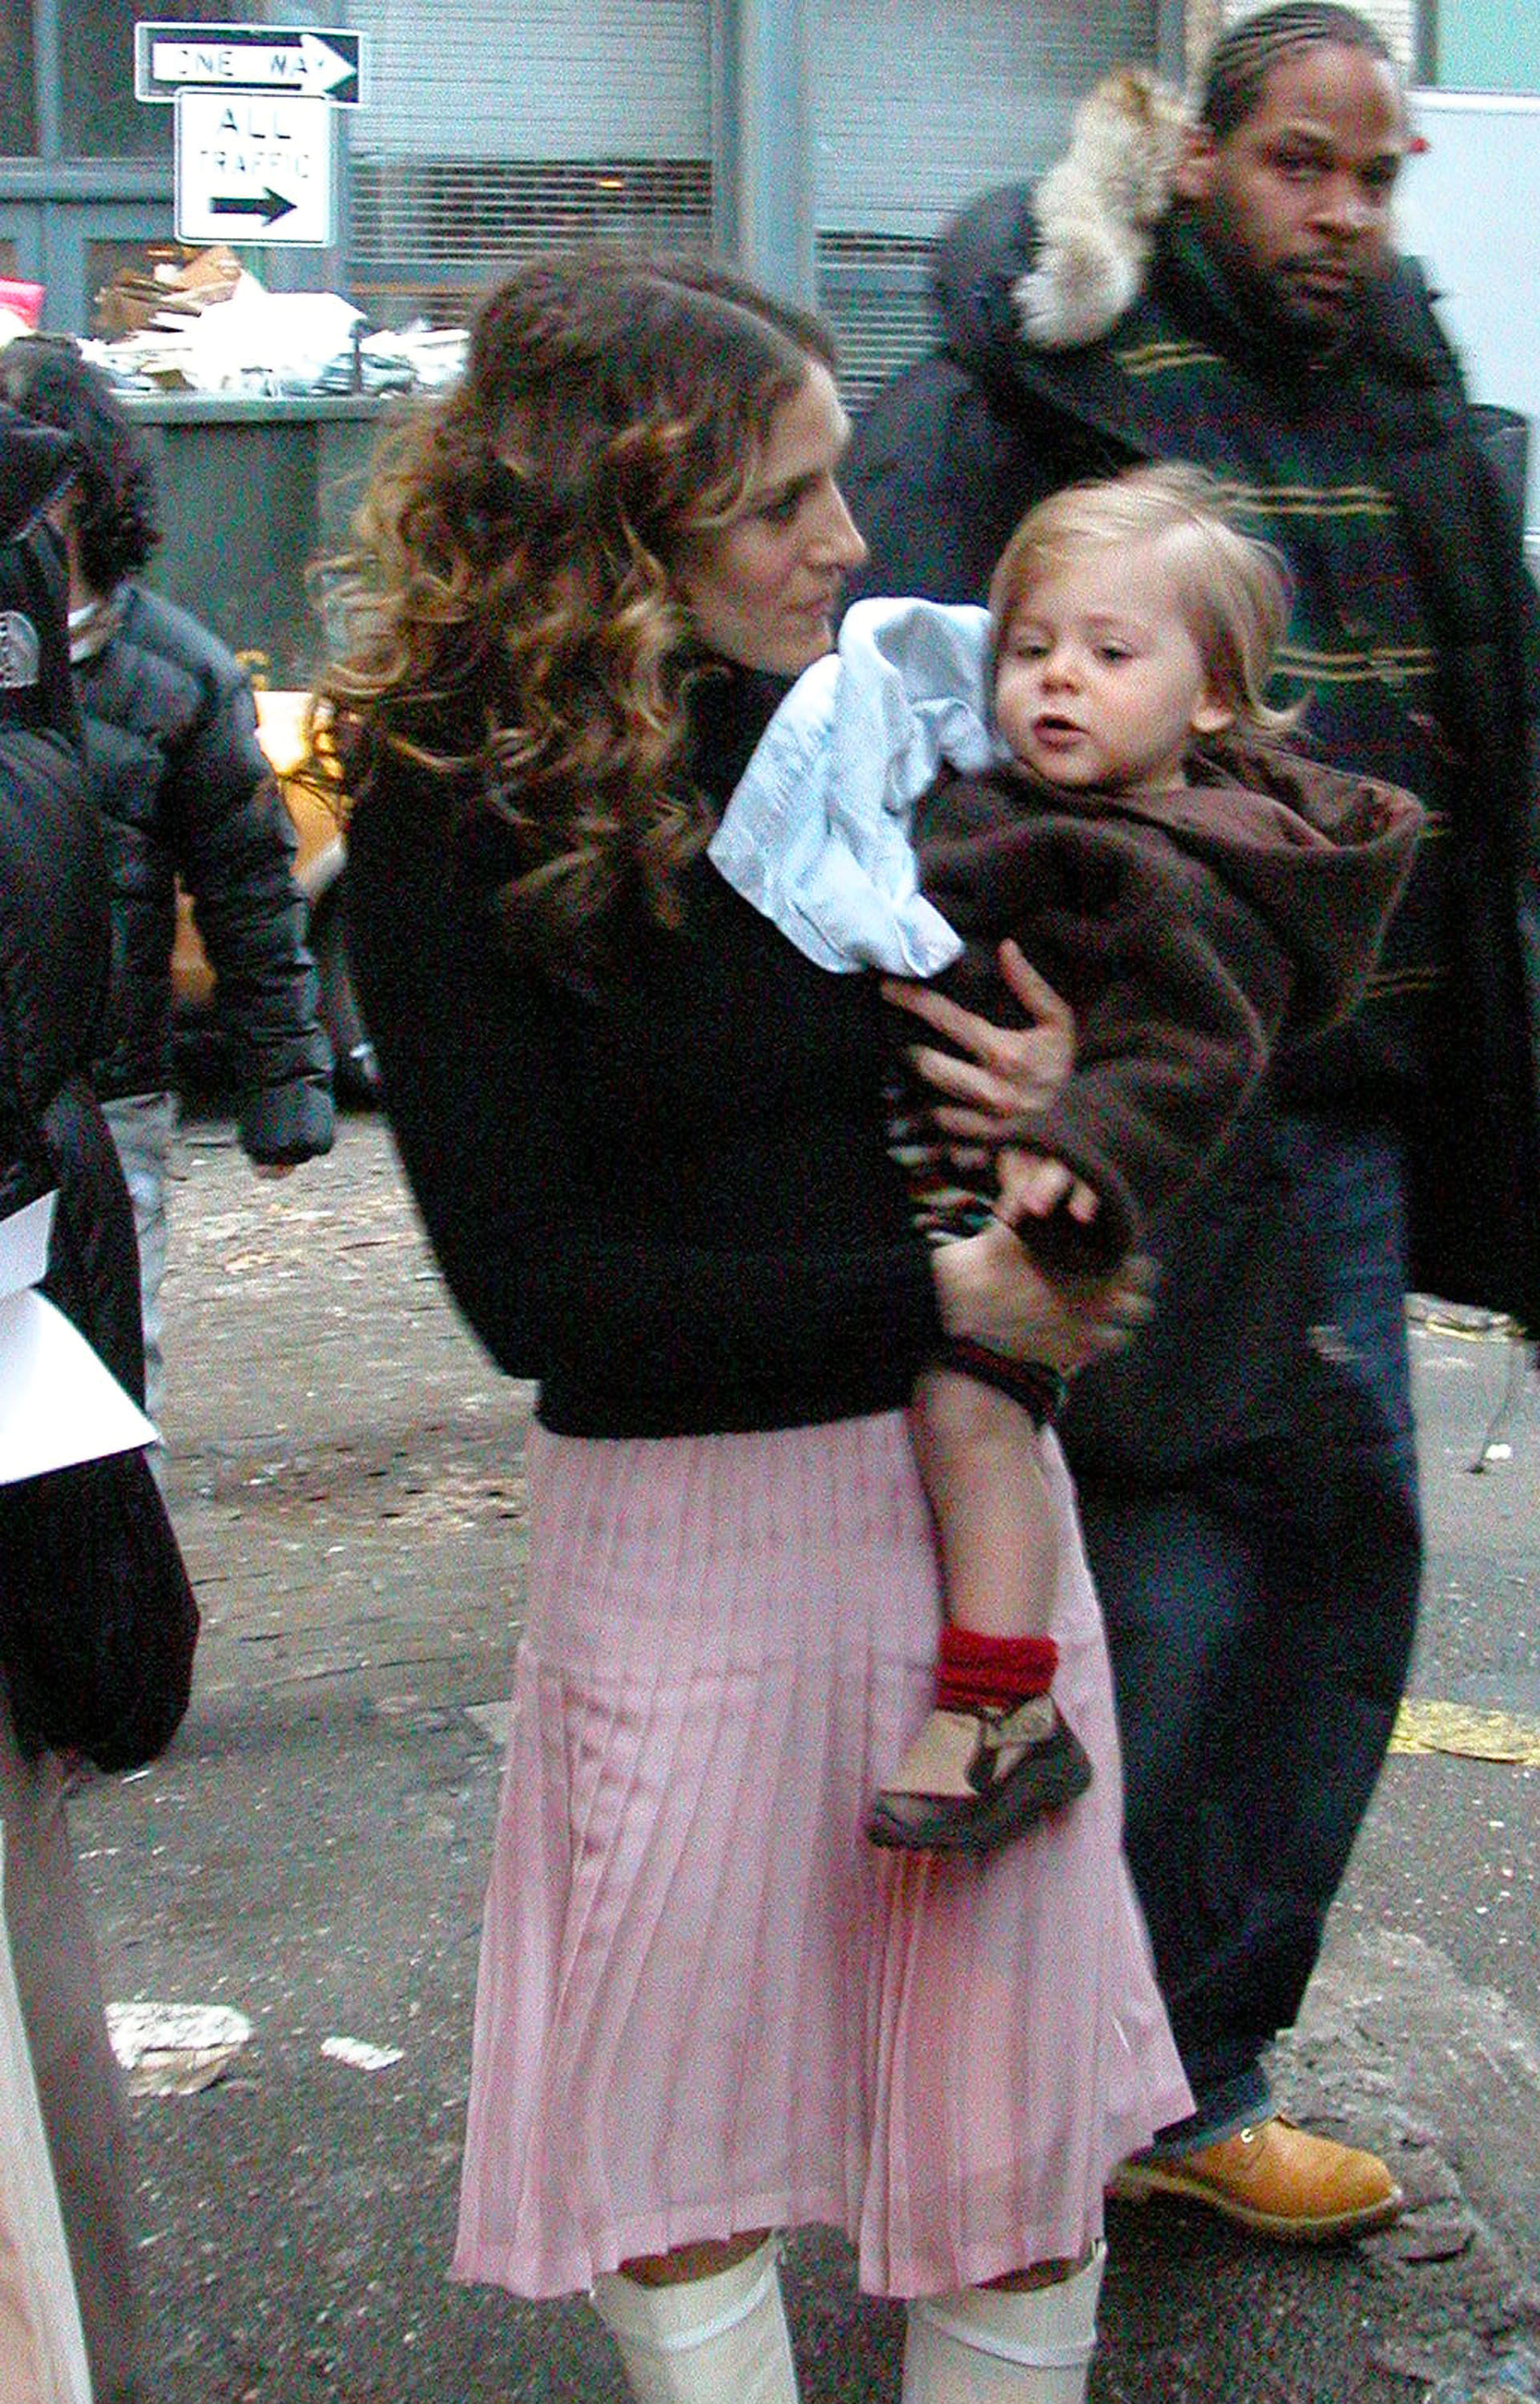 Sarah Jessica Parker returns to her trailer with her son James Broderick after filming a scene for "Sex And The City" on February 2, 2004, in downtown New York City | Source: Getty Images